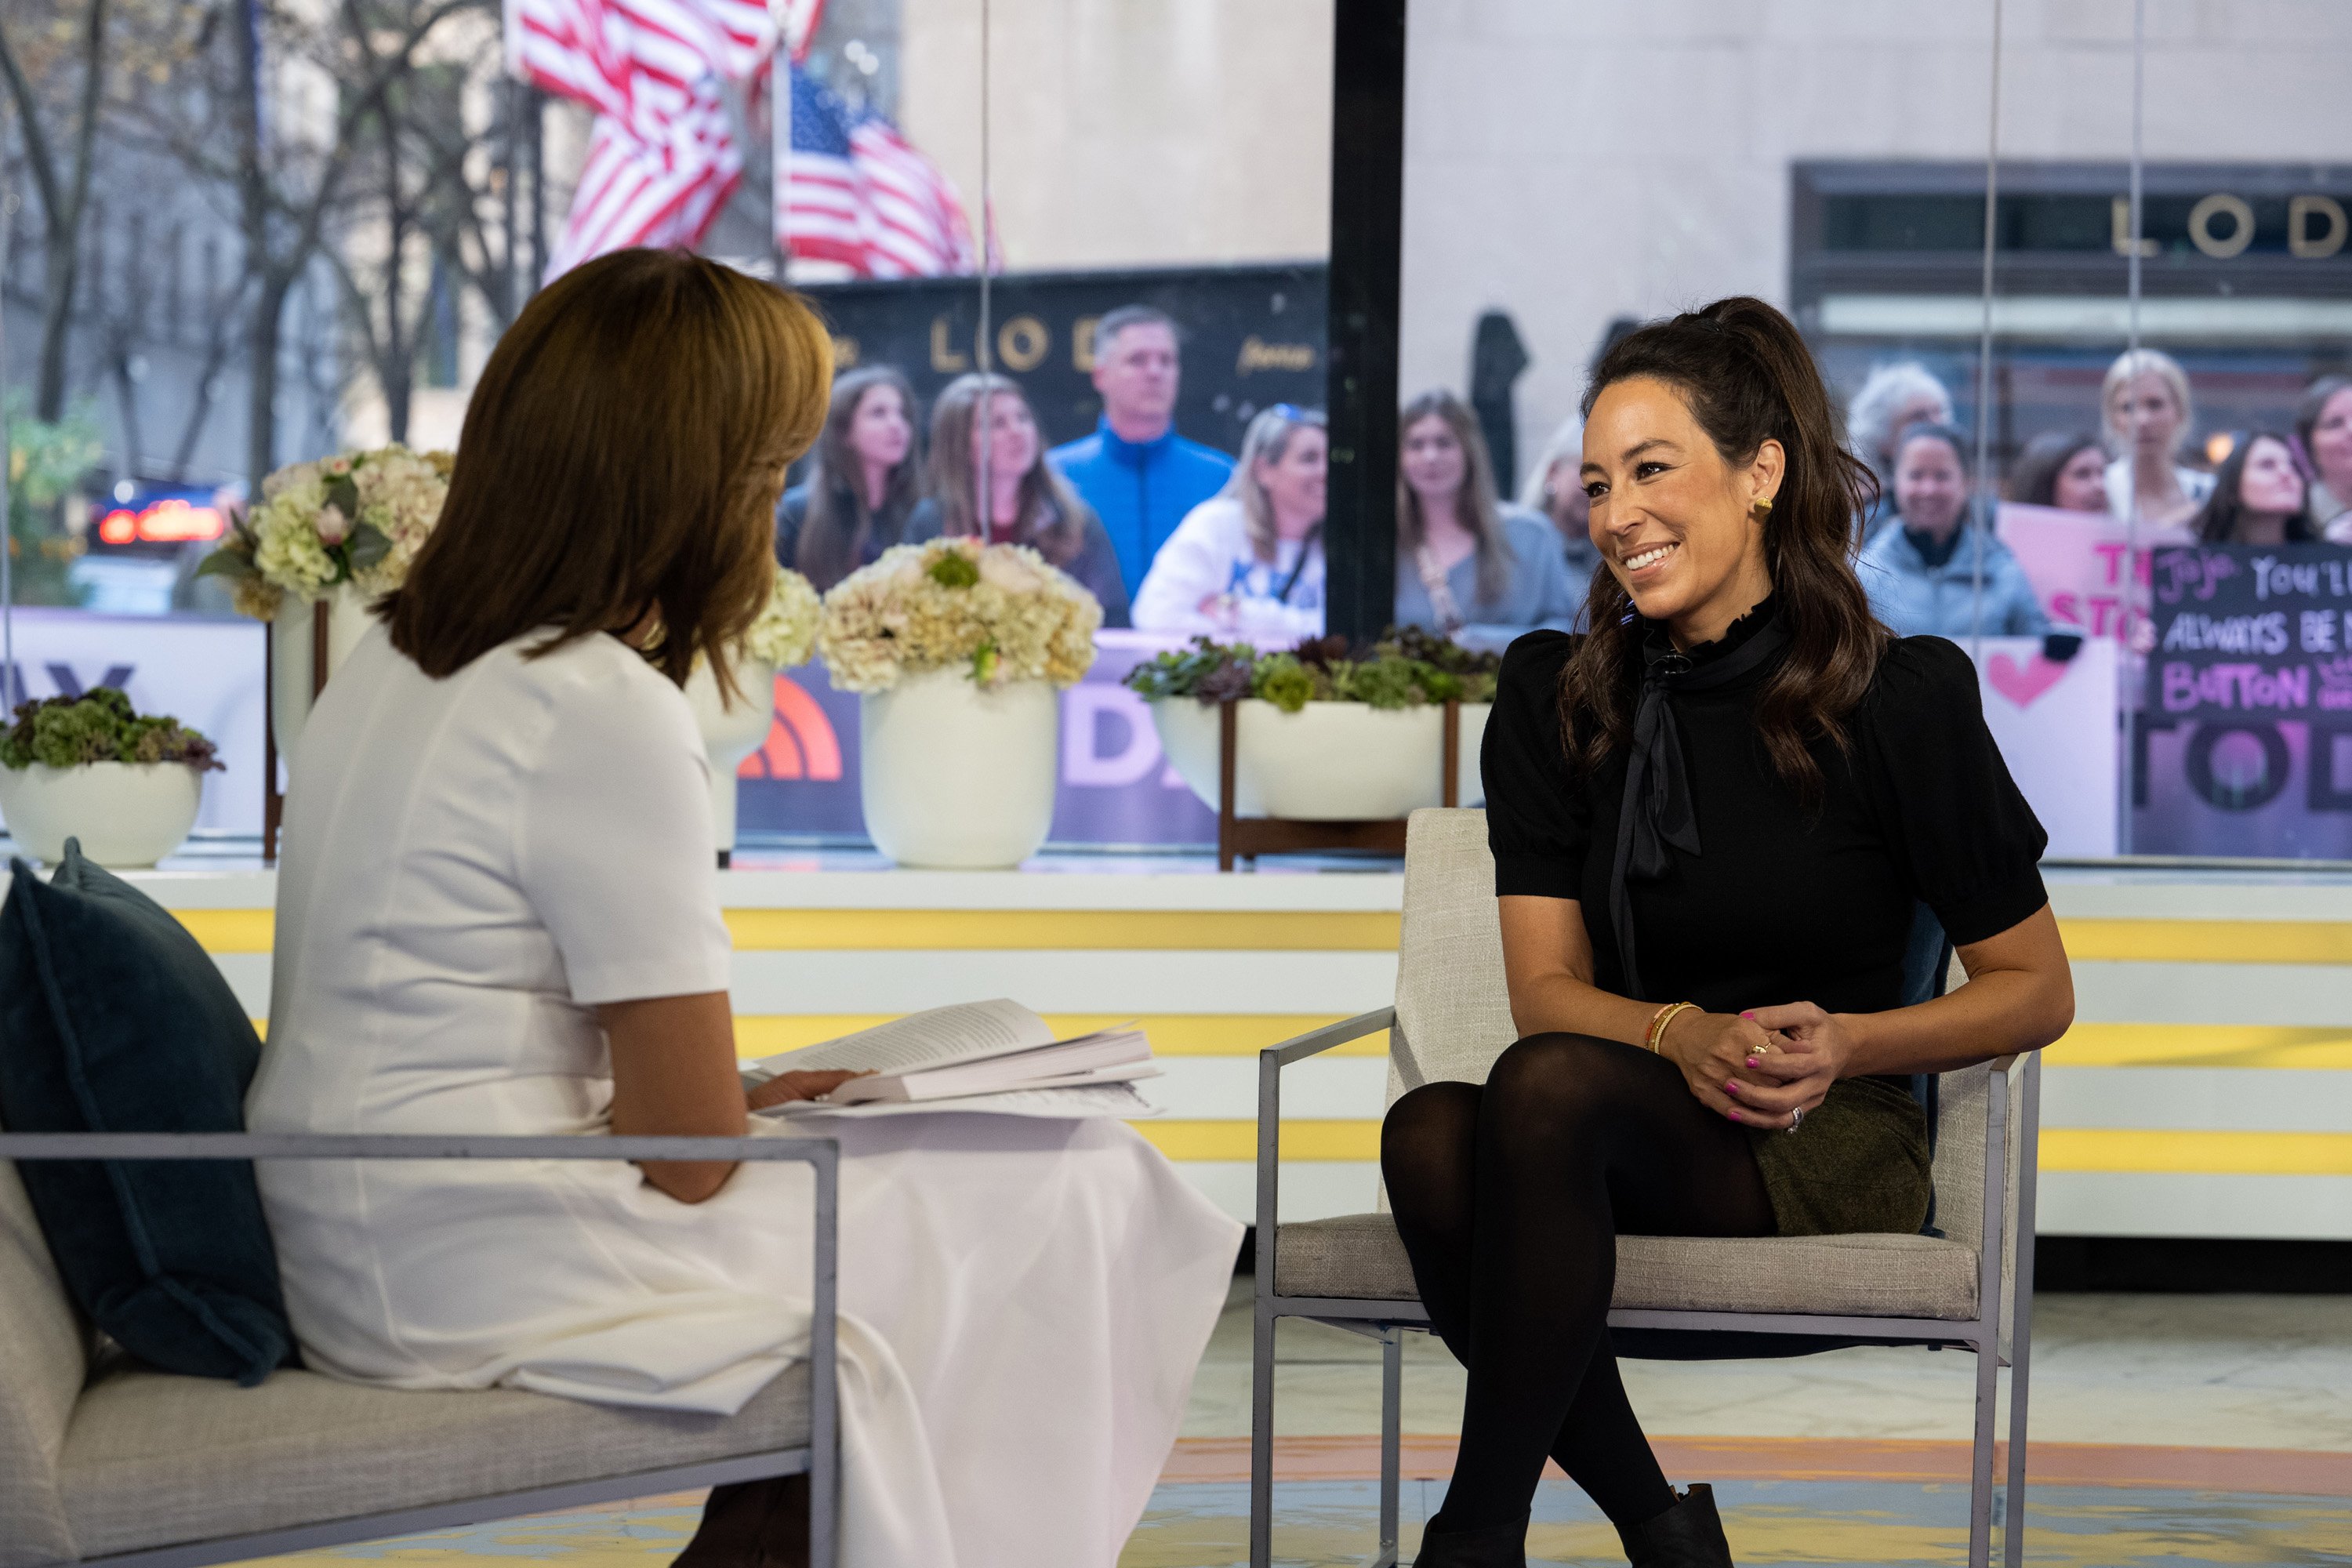 Joanna Gaines Reveals What She’d Be Doing If It Weren’t for Her Interior Design Career